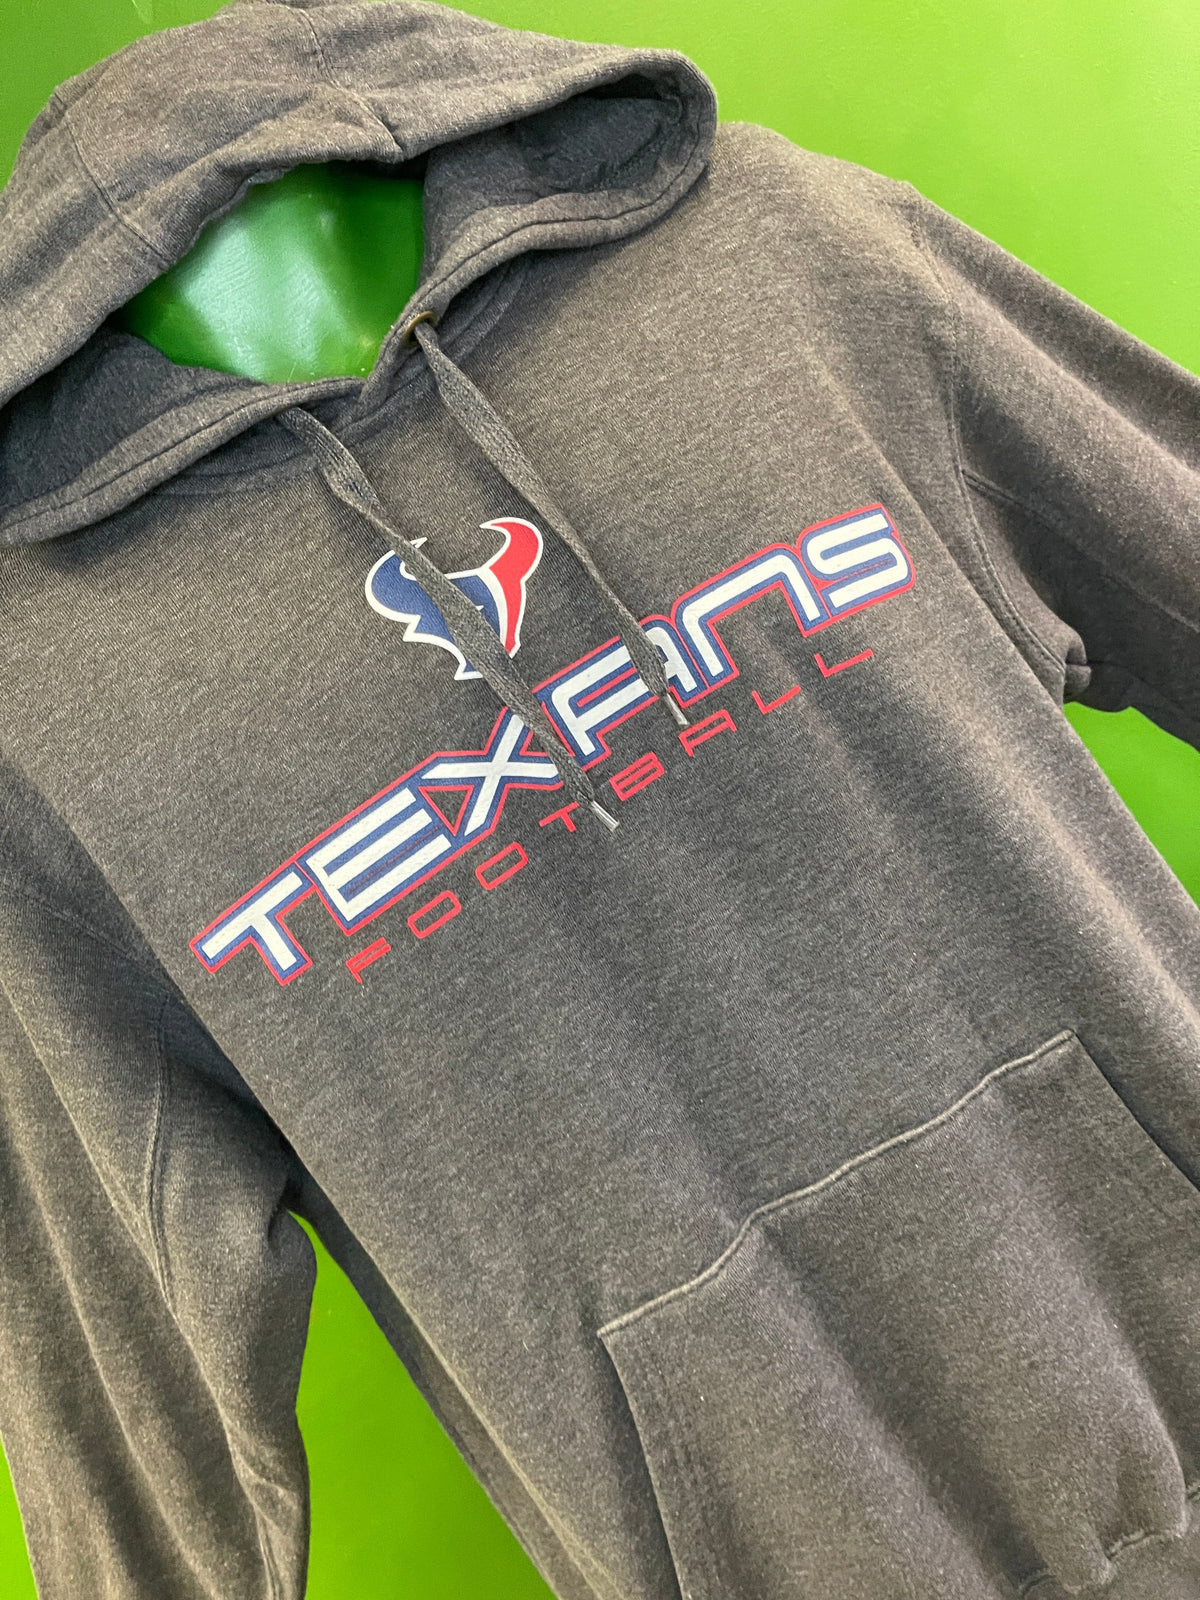 NFL Houston Texans Heathered Grey Pullover Hoodie Men's X-Large